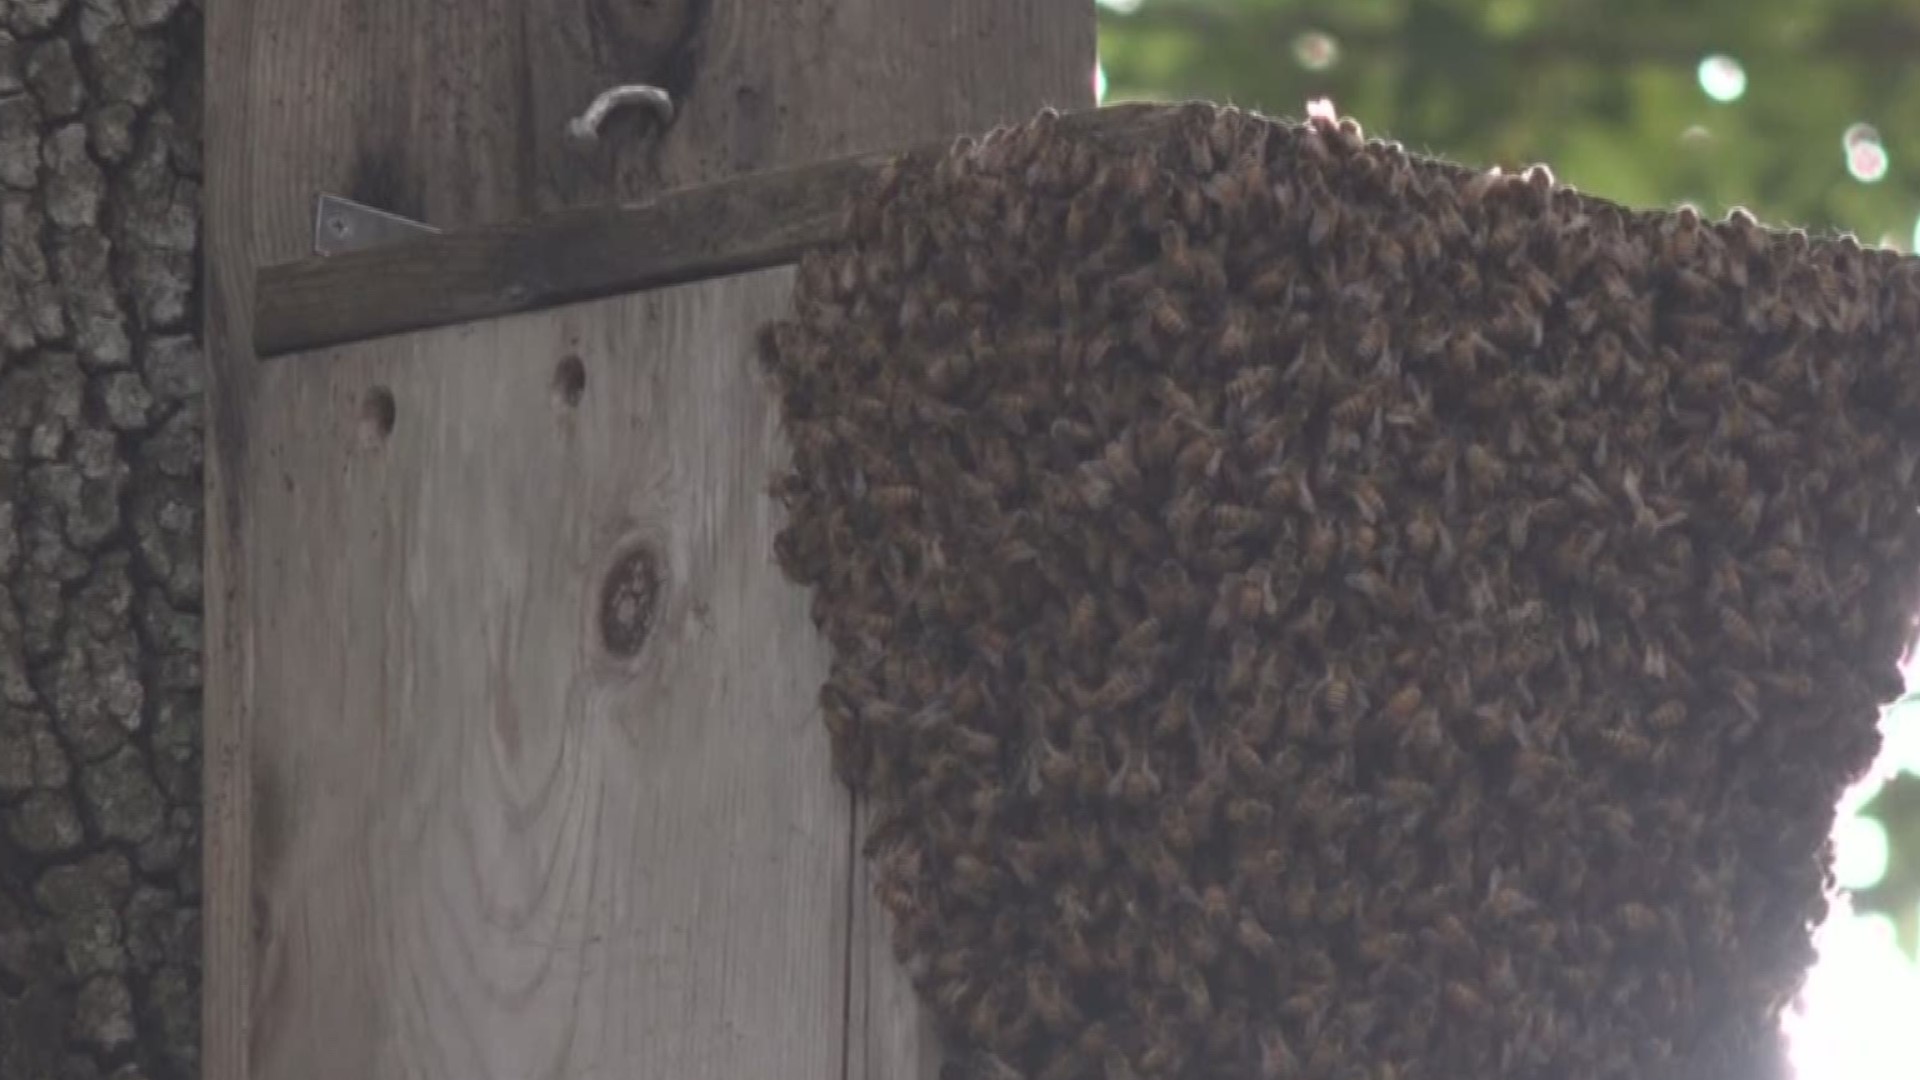 Moving a hive of bees turned into a nightmare for a family who lives near Plant High School.